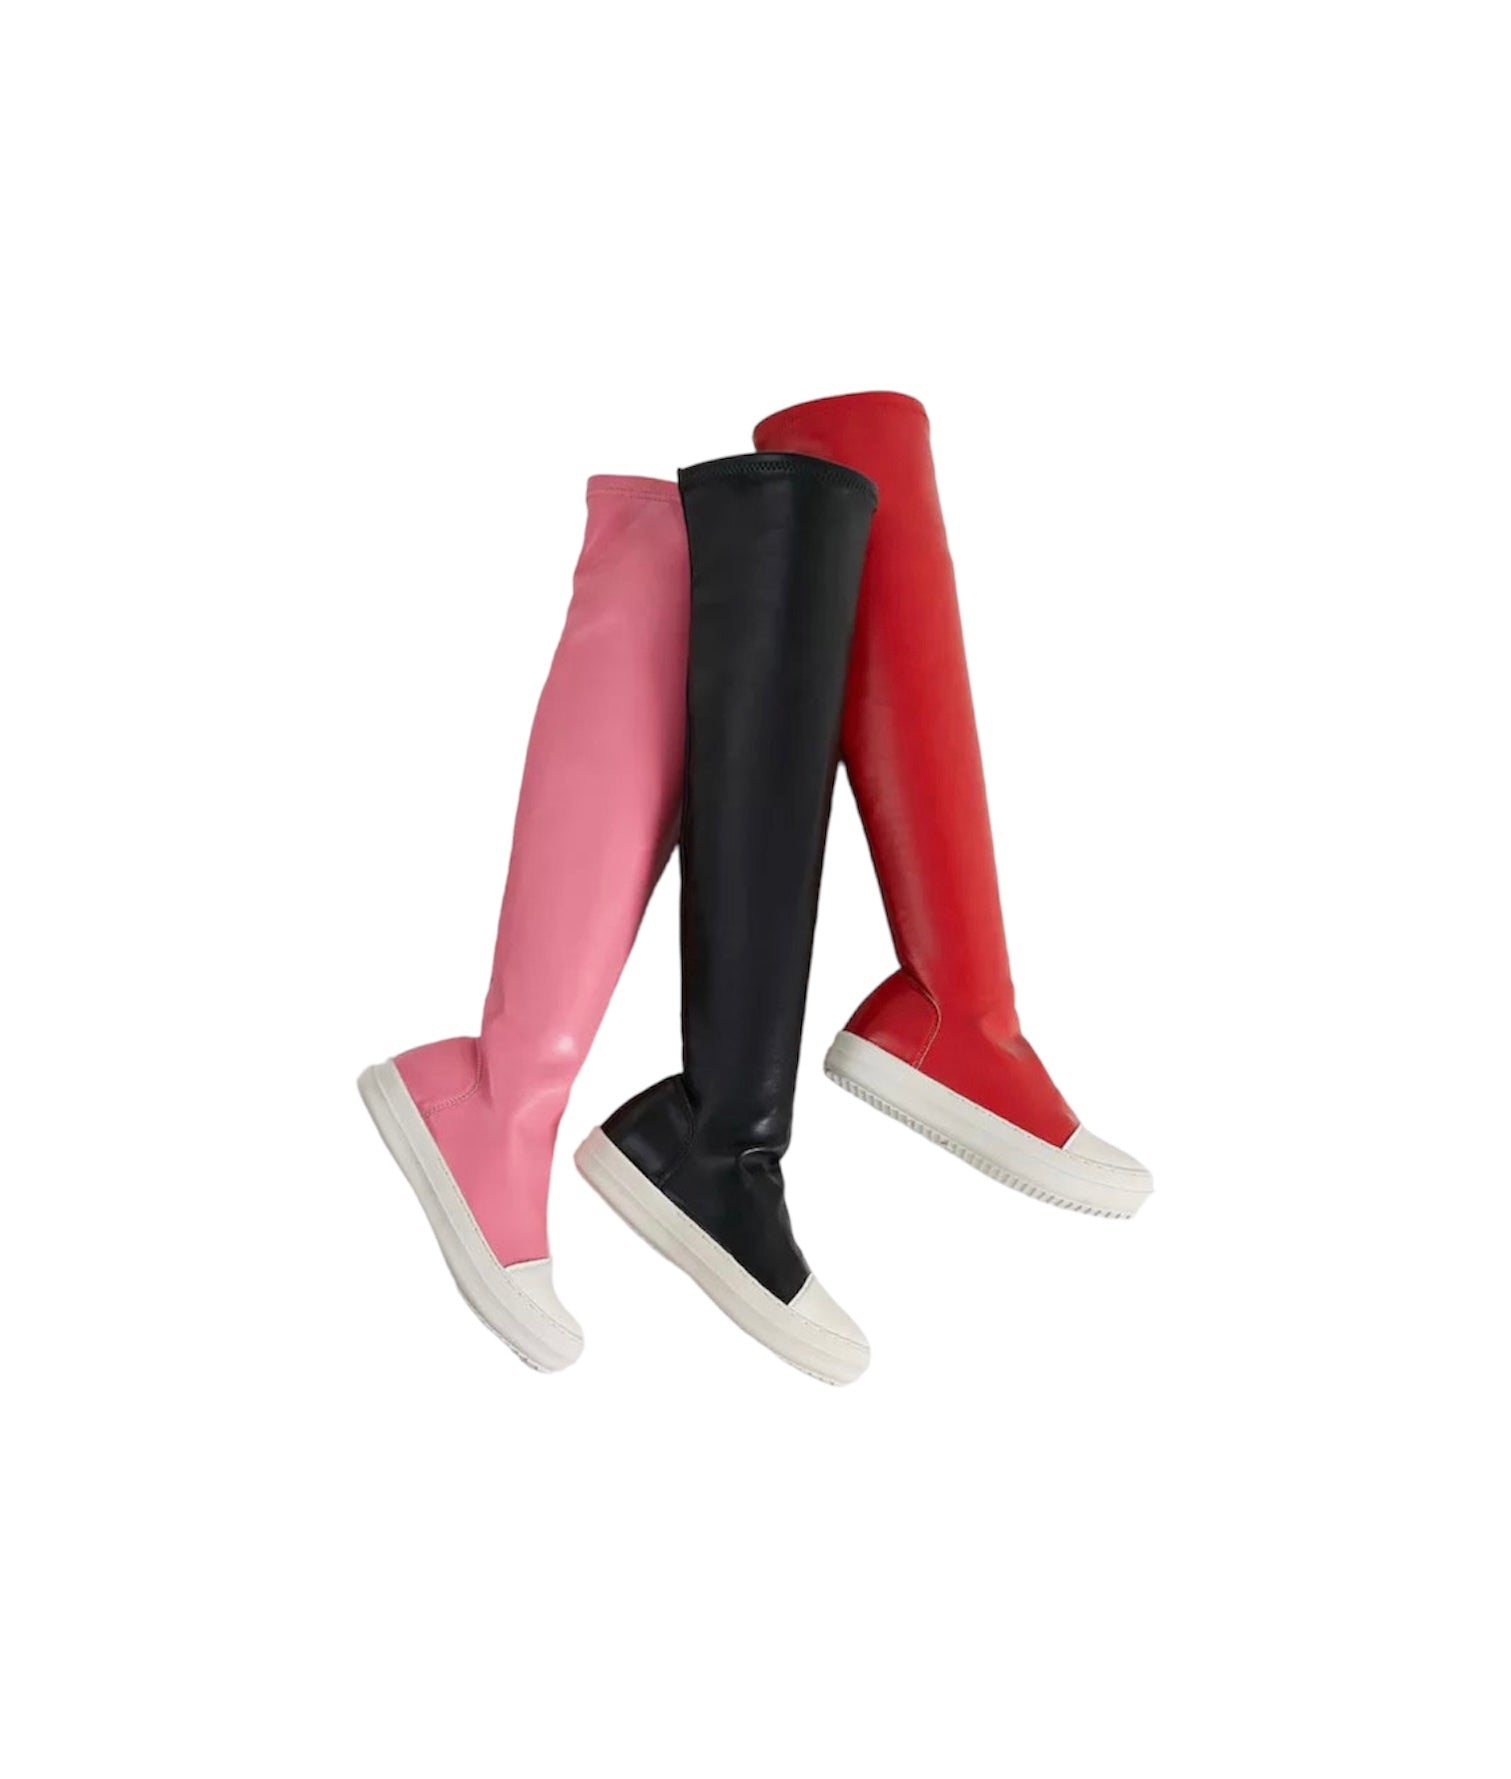 PU Leather Over The Knee High Boots - Multi - Dezired Beauty Boutique